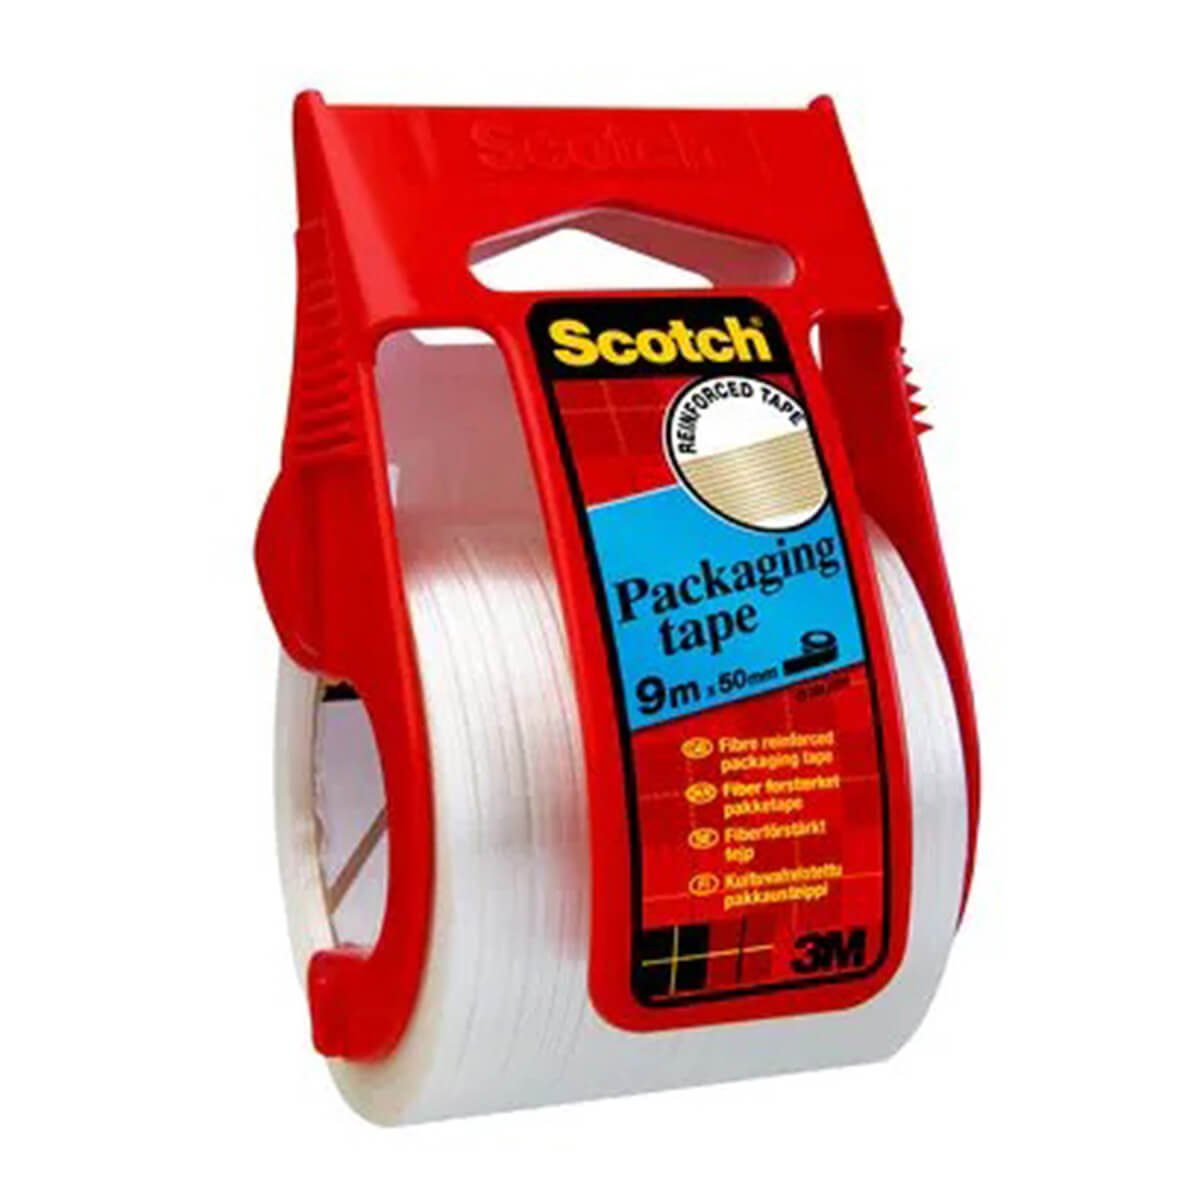 Scotch Packaging tape 50 mm x 9 m fibre-reinforced adhesive tape White in hand dispenser Parcel tape